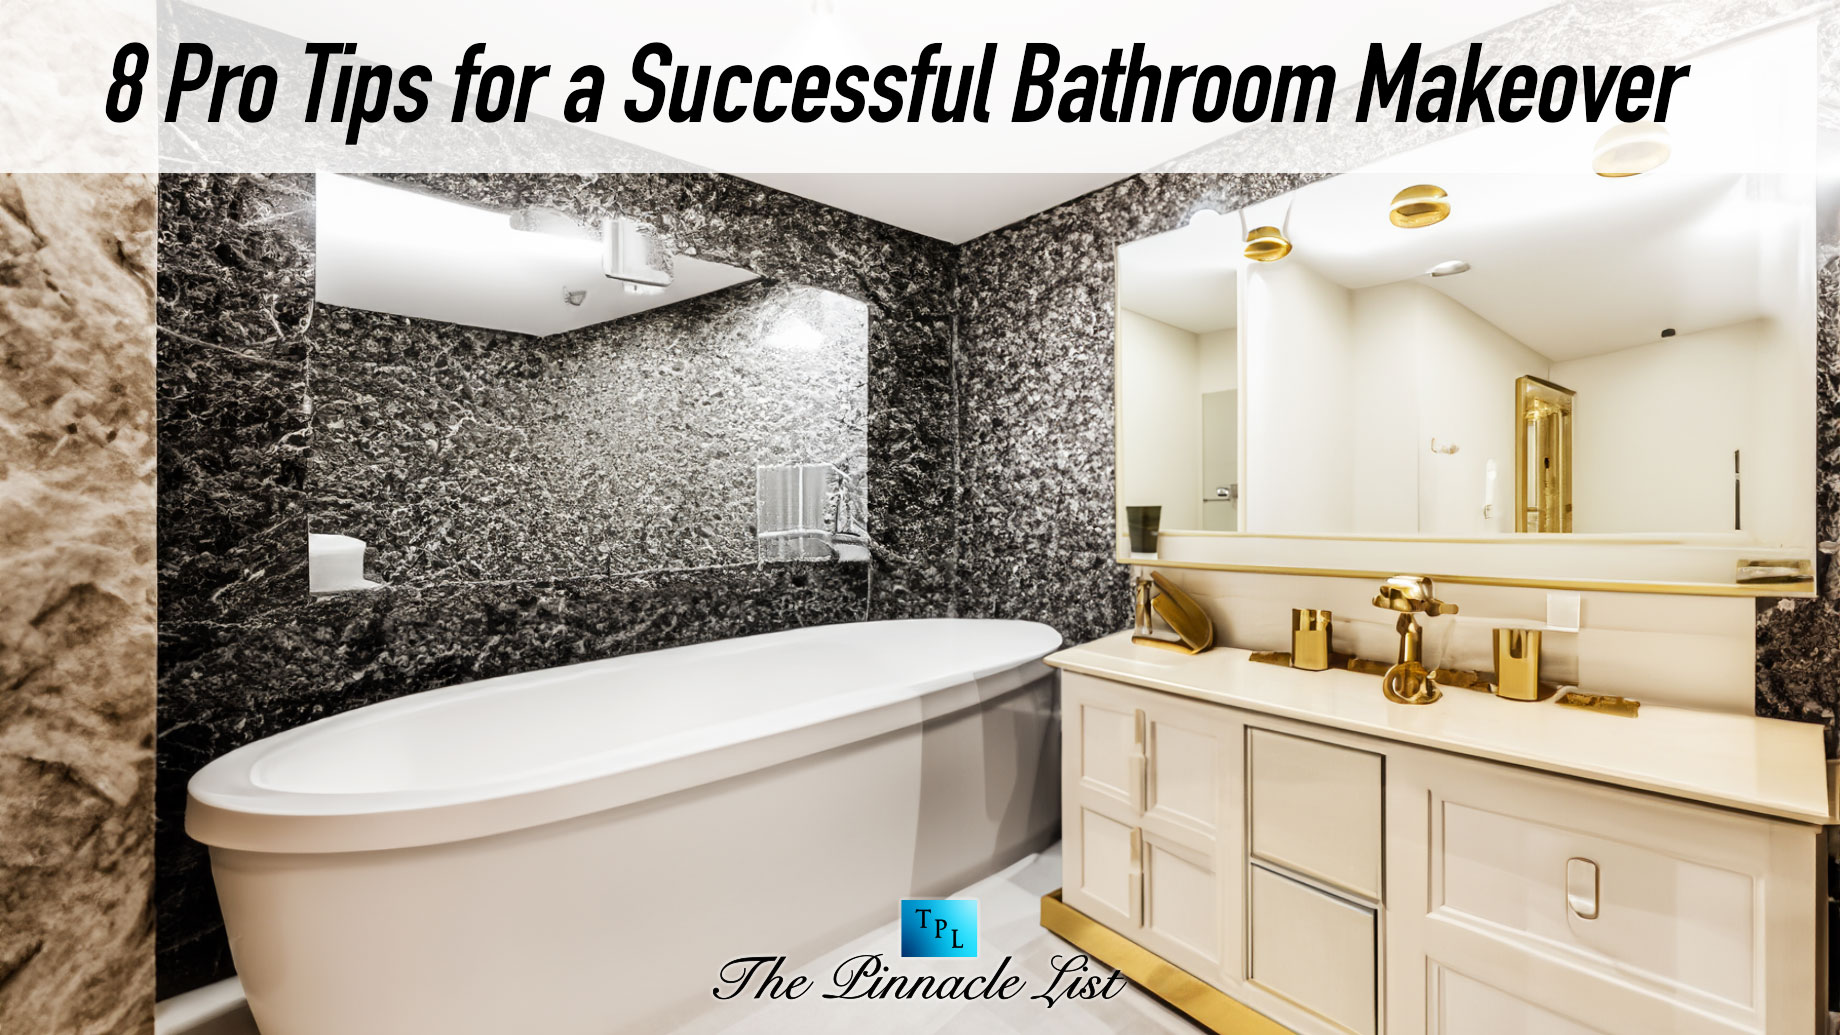 8 Pro Tips for a Successful Bathroom Makeover